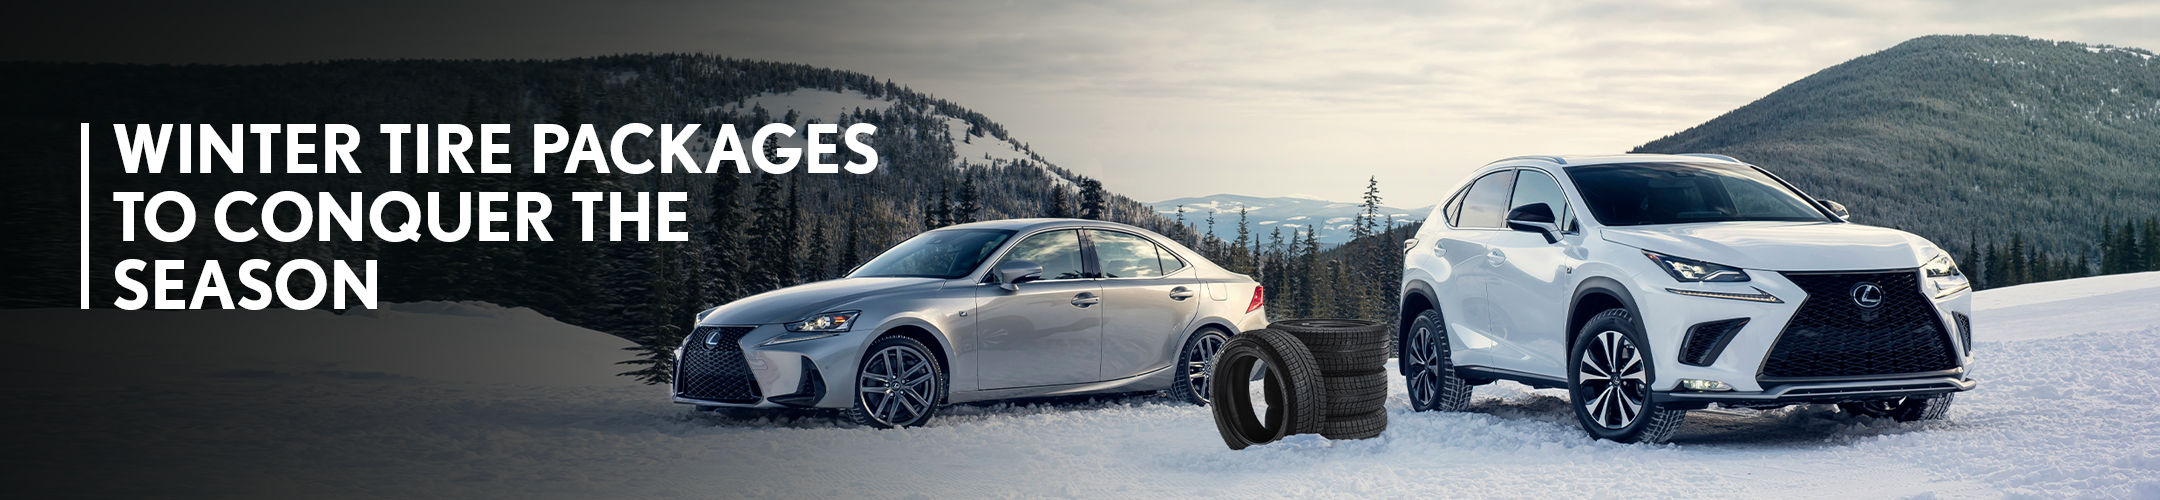 Winter Tire Packages To Conquer The Season | Toronto, ON